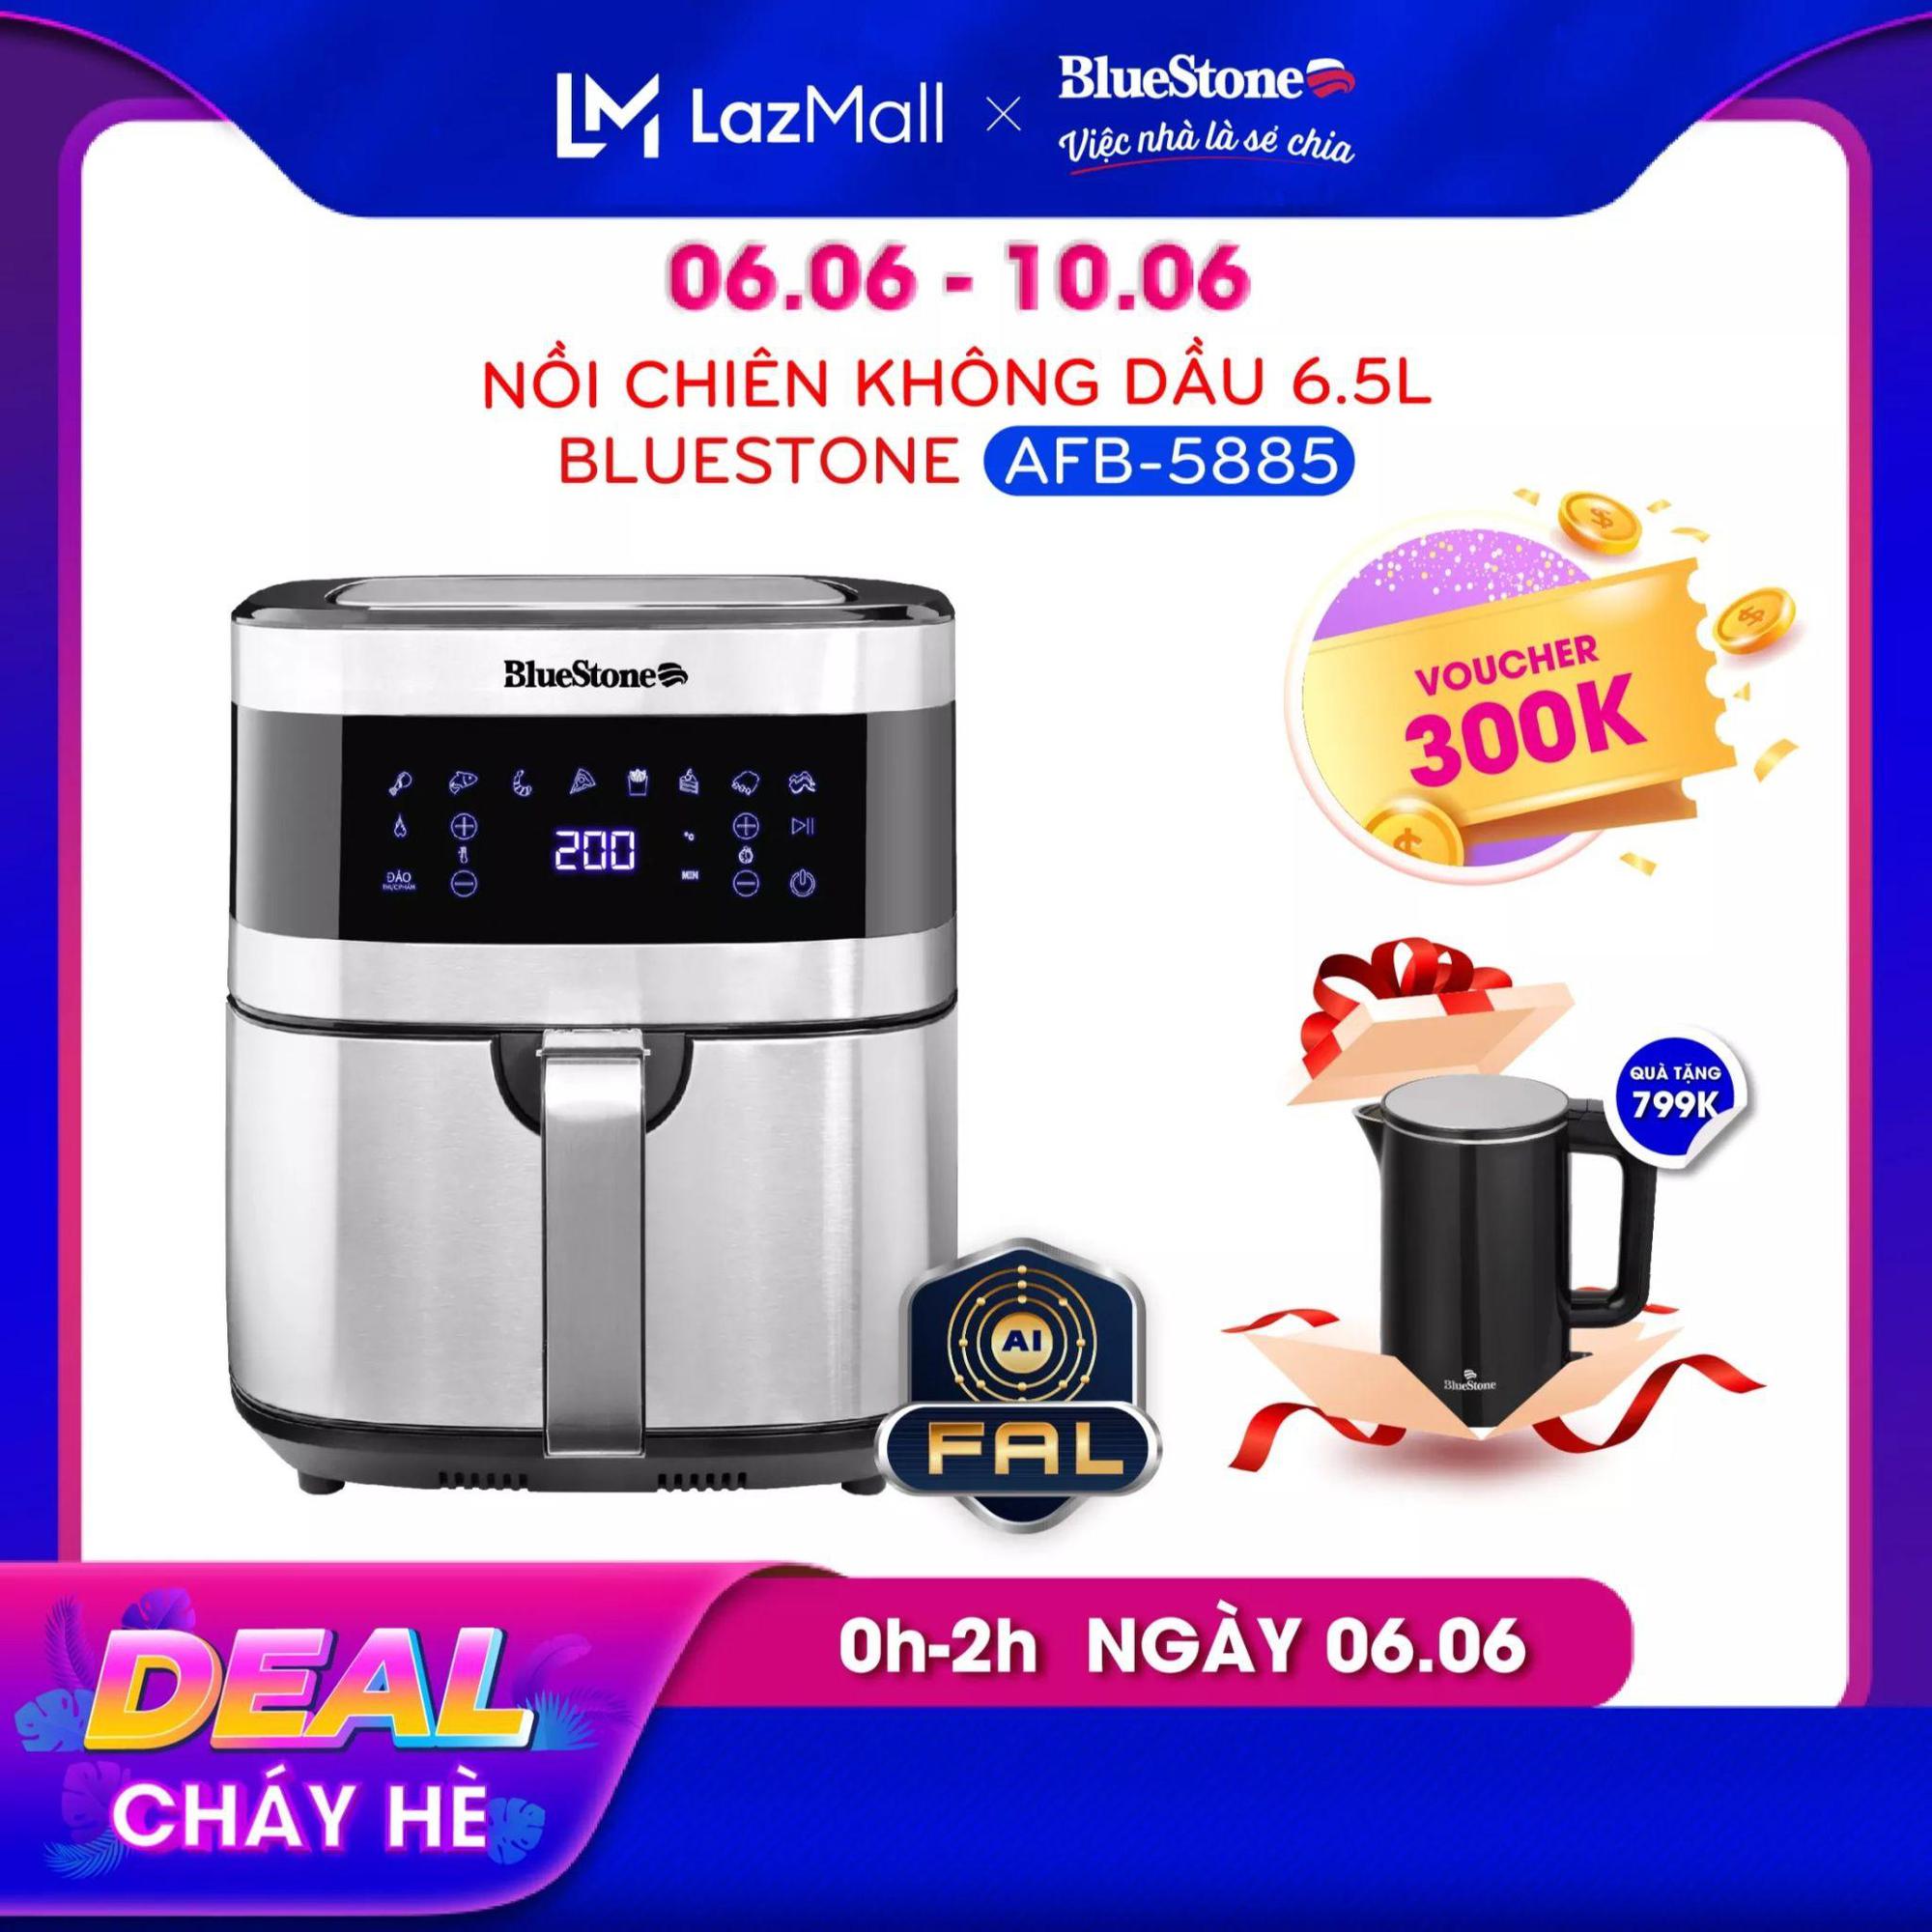 6 household deals with shock discounts from June 7-10 on Lazada with freeship of 0 dong, sisters can cook delicious dishes, dispel the summer heat of Hanoi - Photo 3.